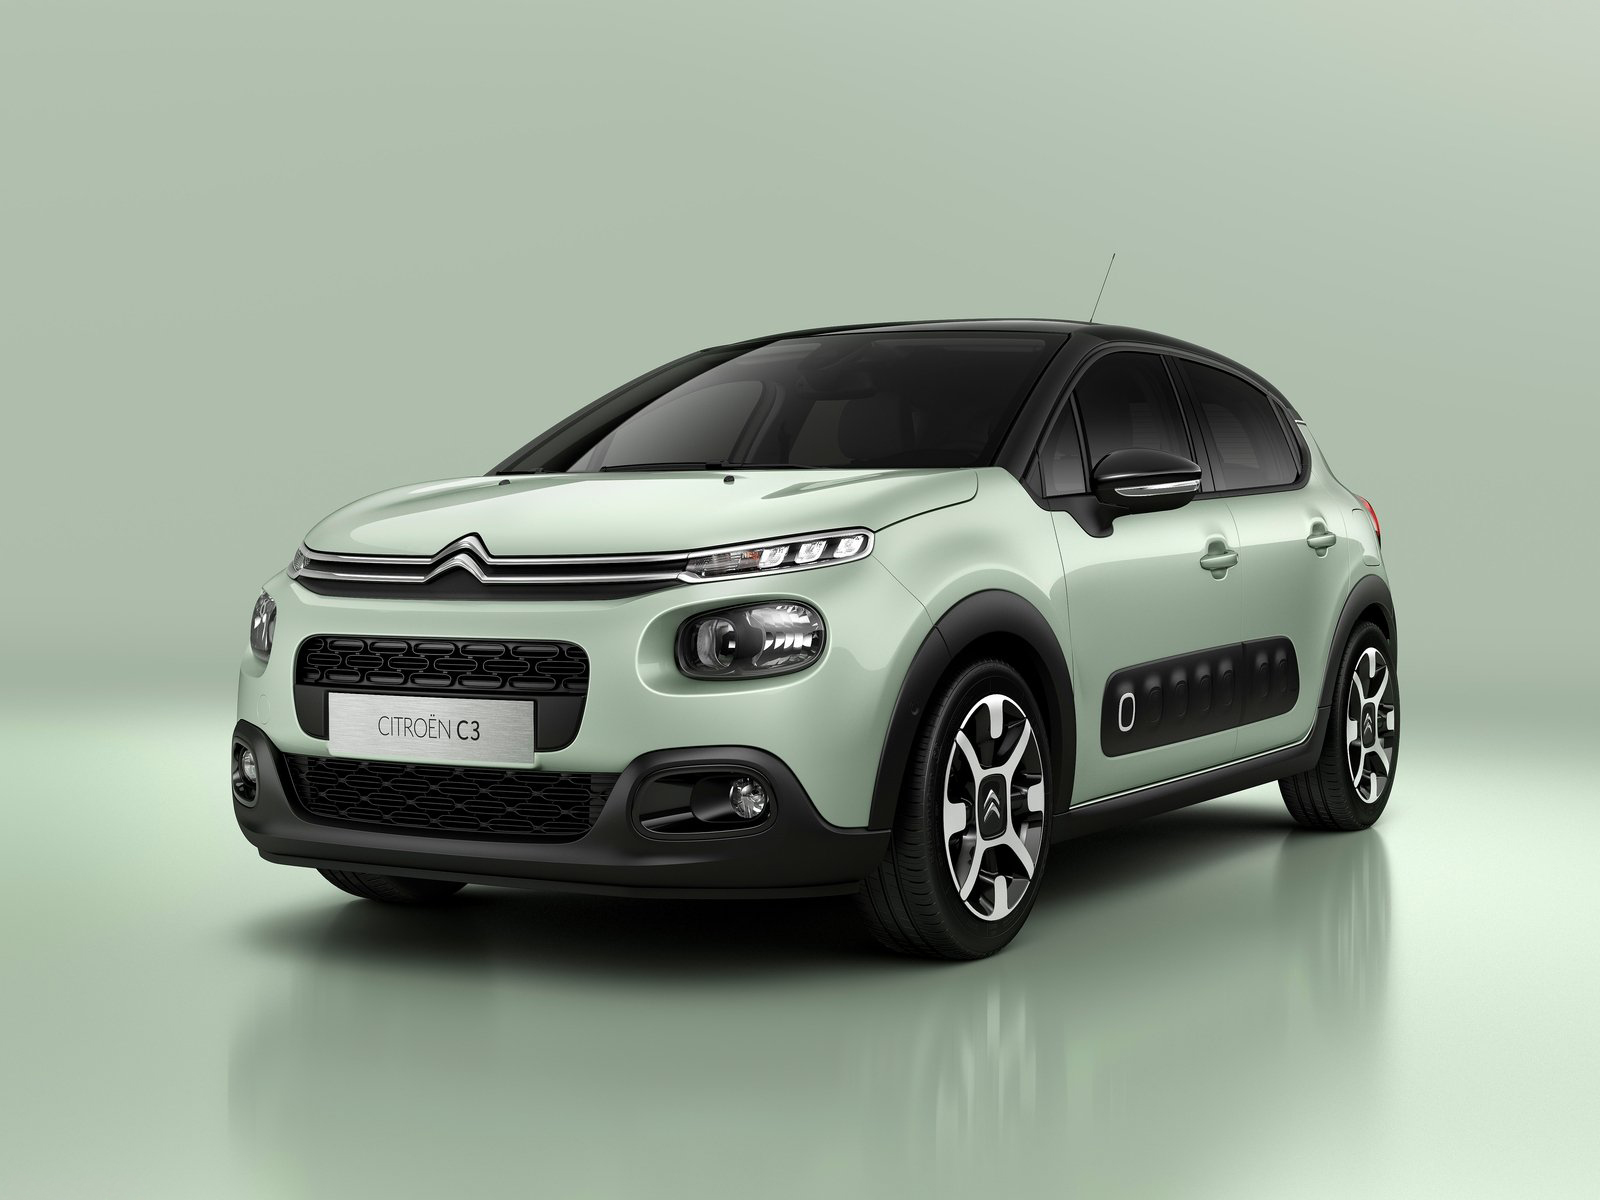 Citroën C3 Switches To Autogas In Spain | Gazeo.com